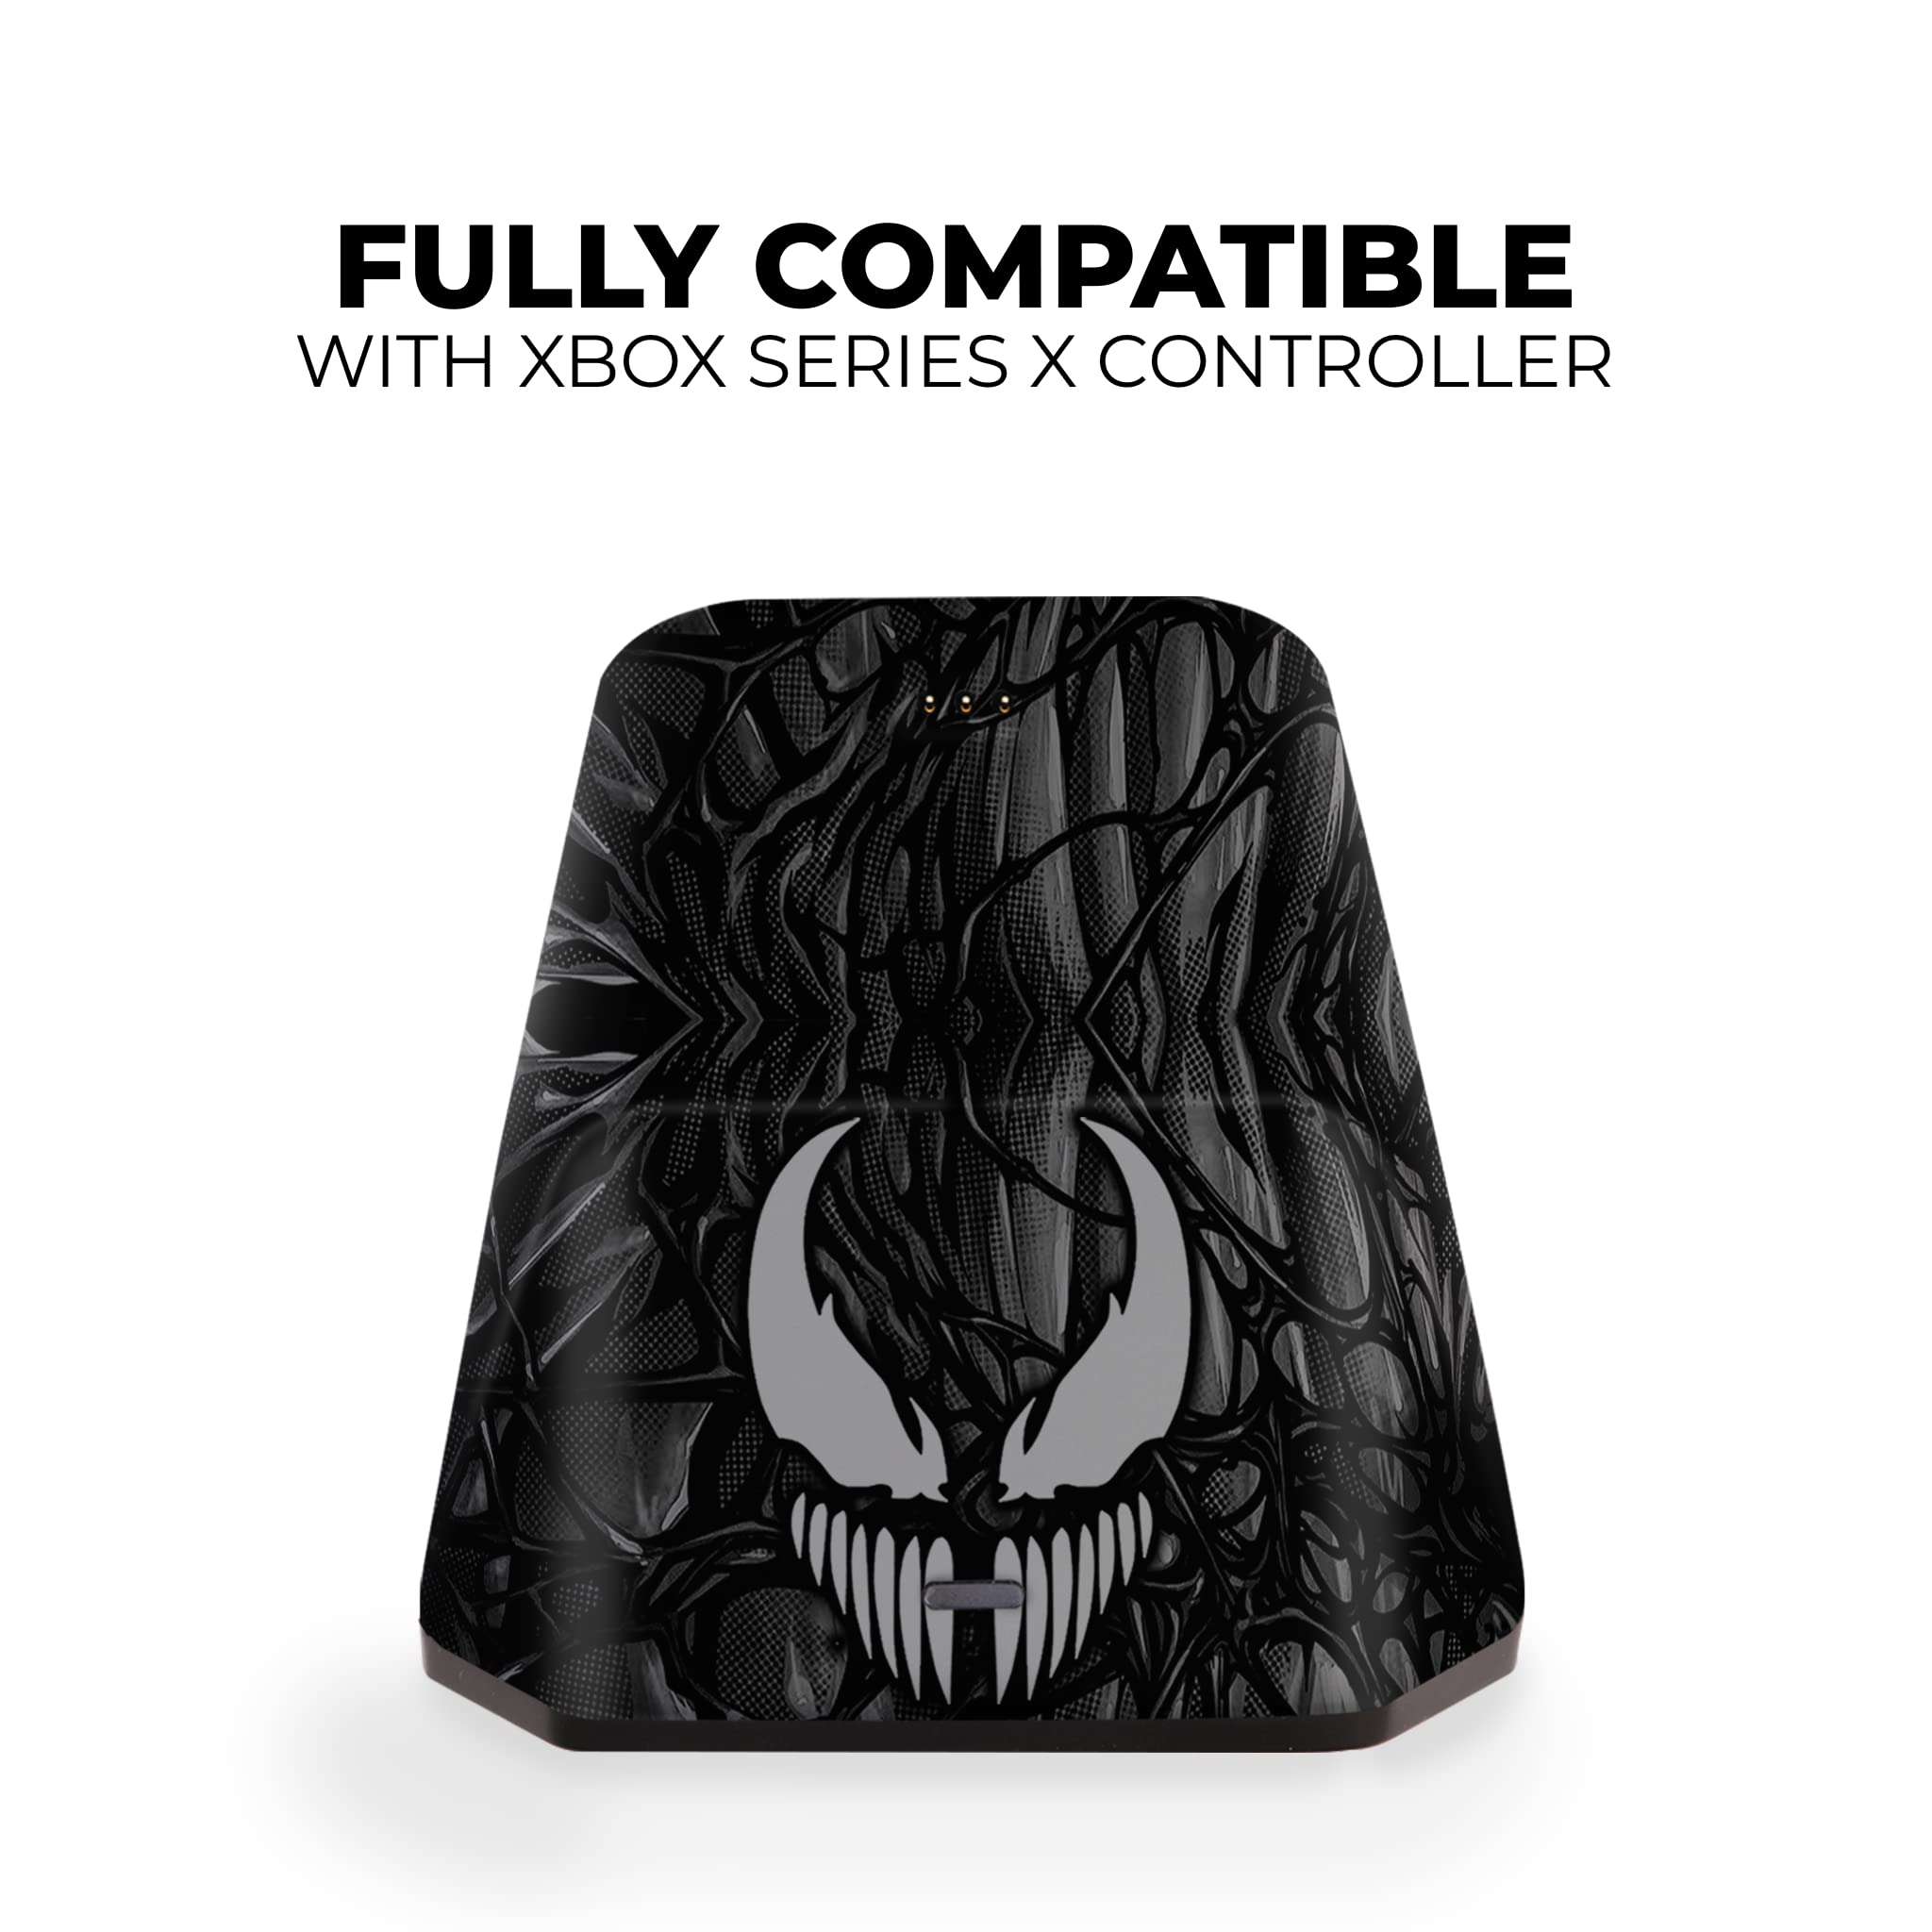 Original Xbox Wireless Controller and Stand Compatible with Xbox One|Series  X|S Customized in USA with Advanced HydroDip Print Technology(Not Just a 